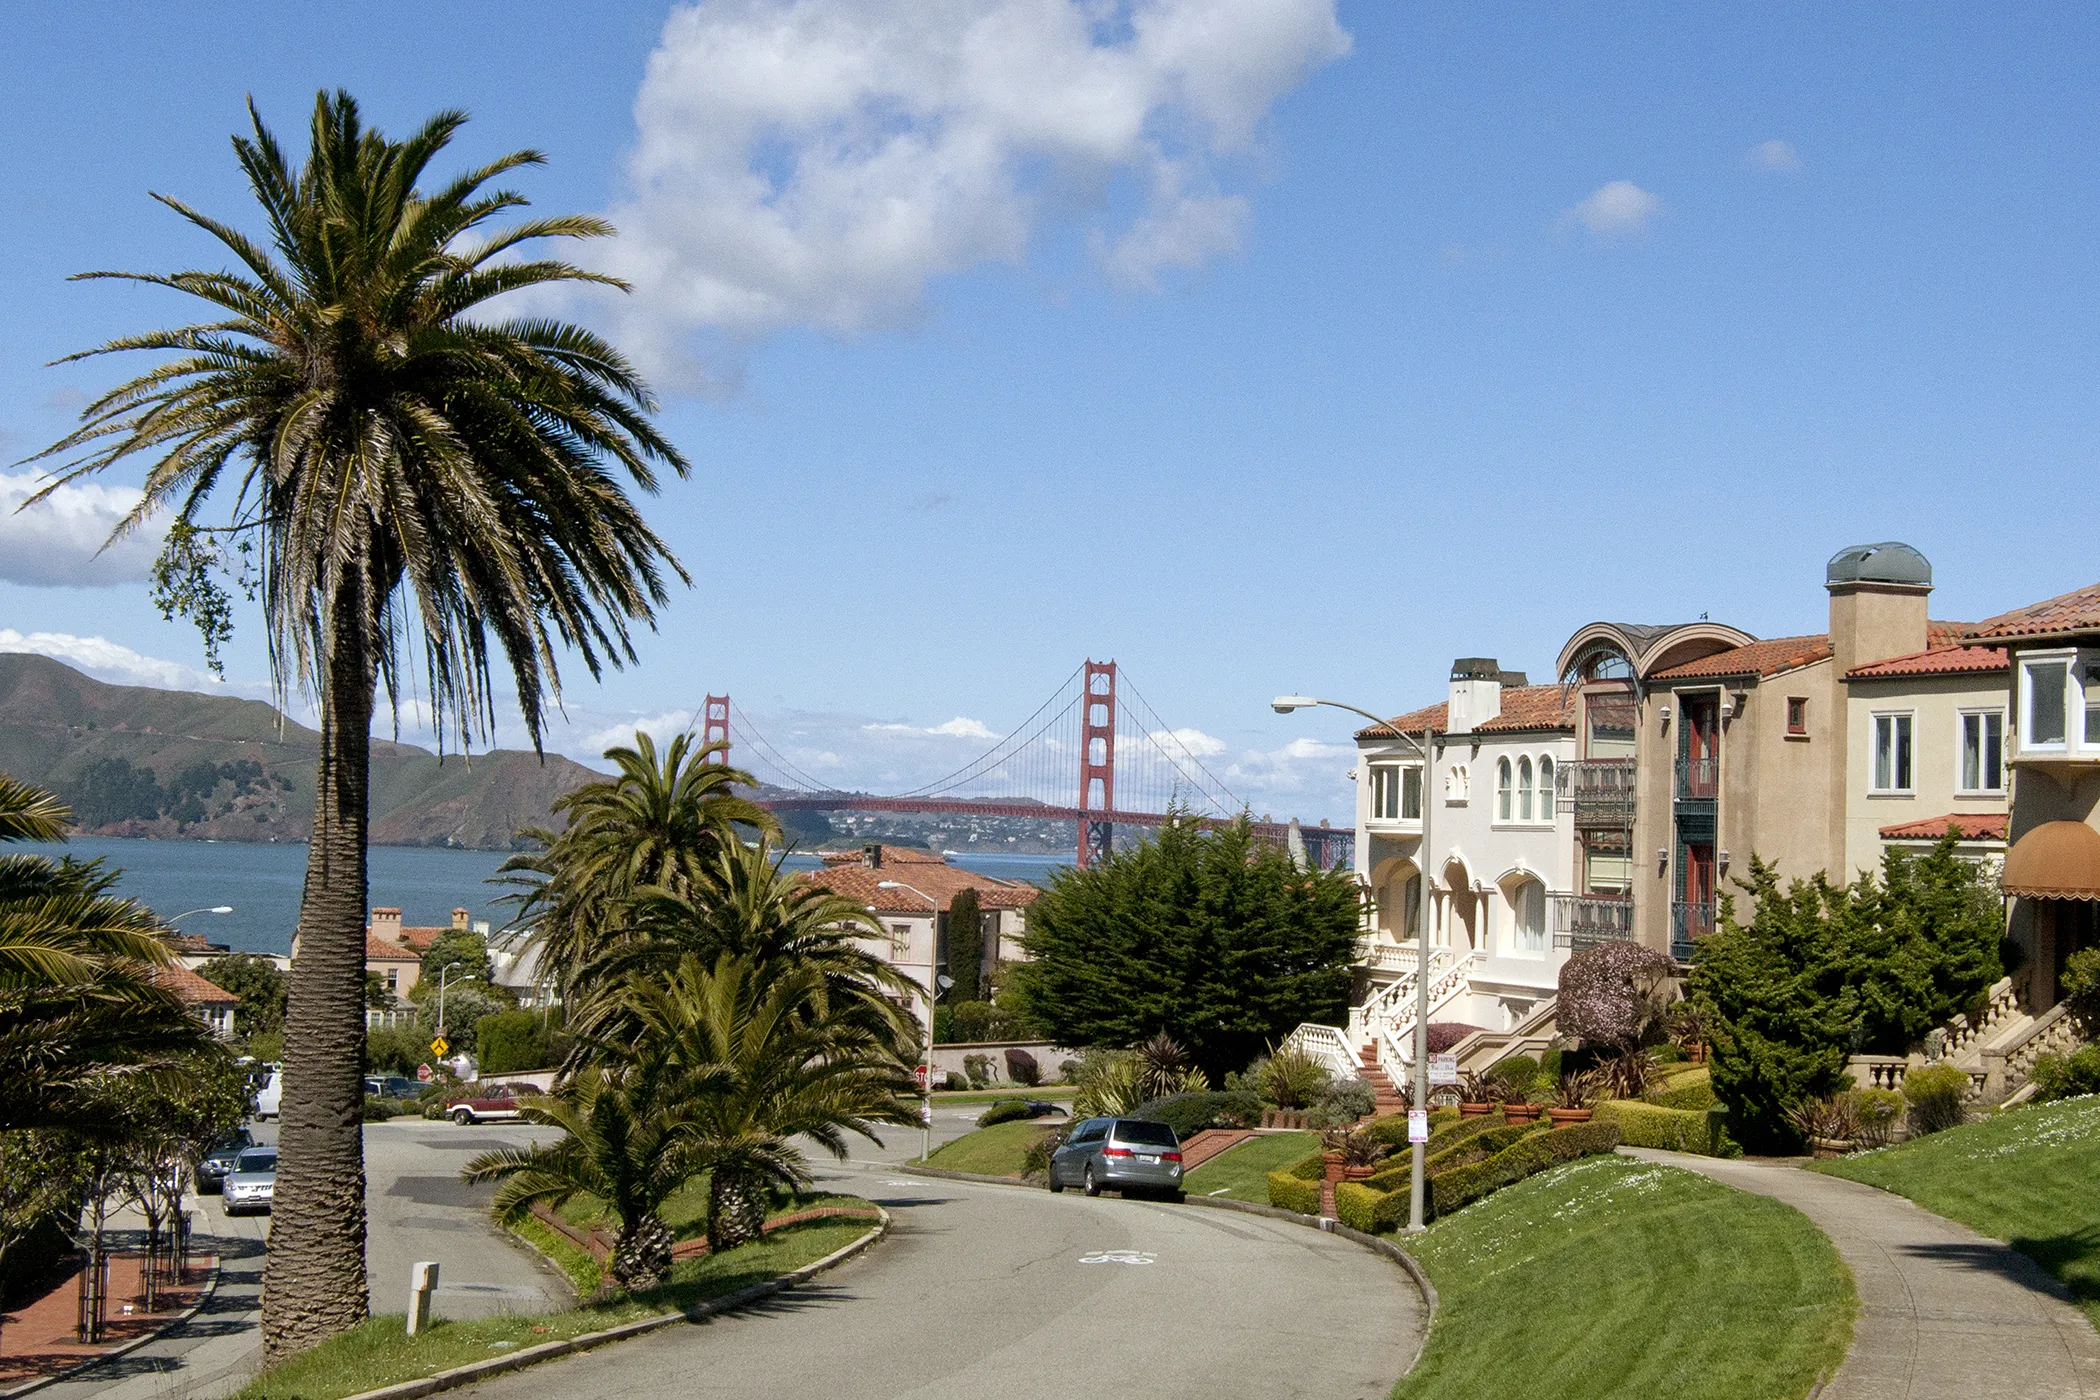 How Much You Need to Make to Own a Home in a Major U.S. City